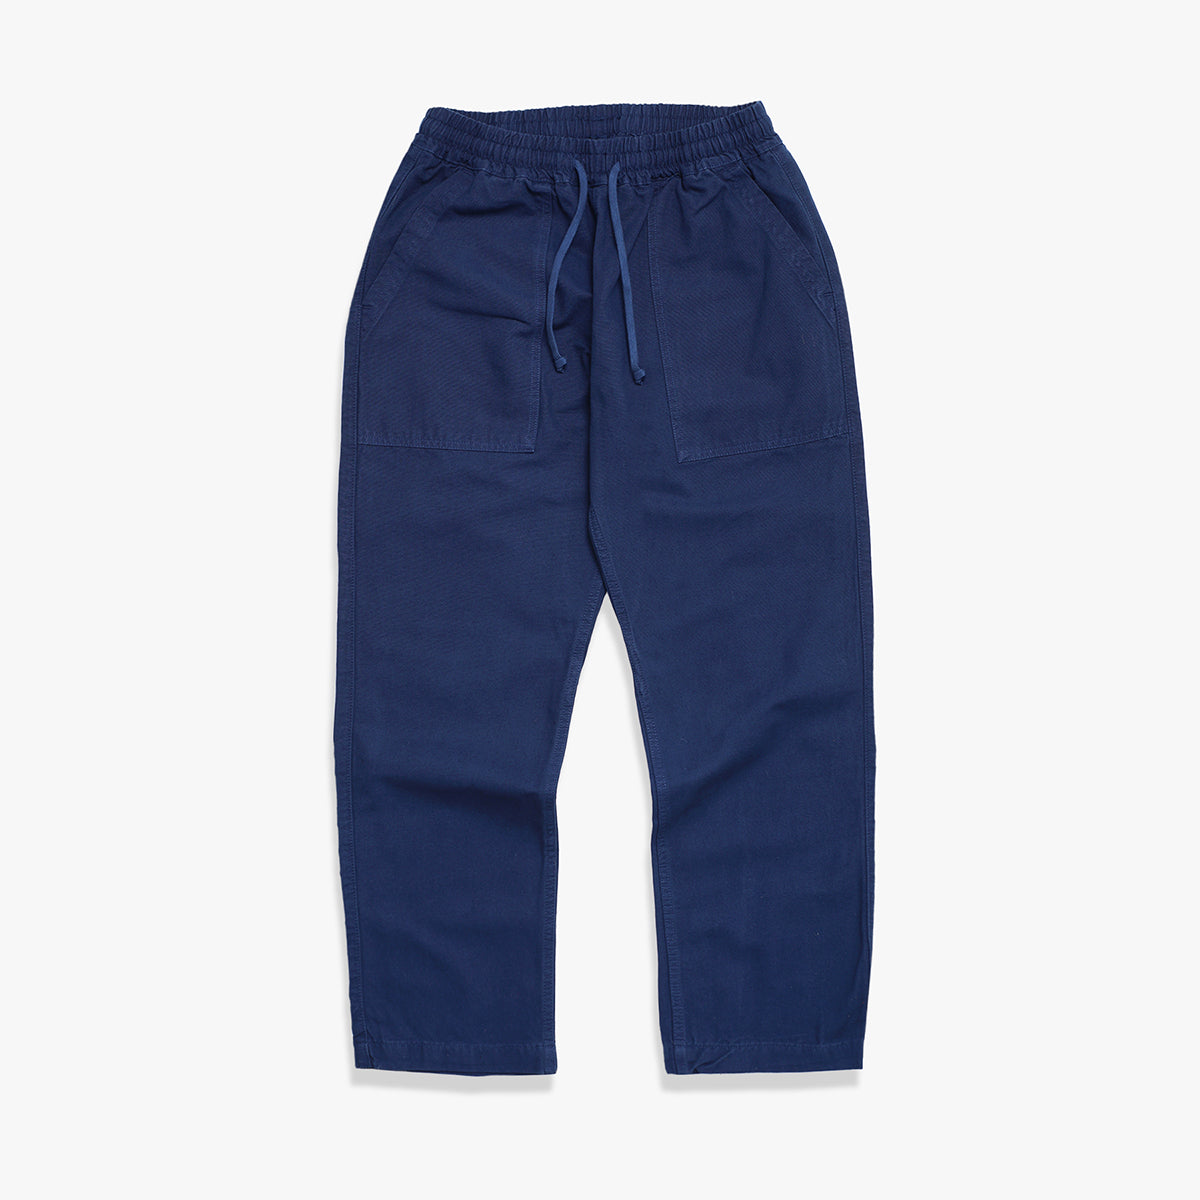 Service Works Canvas Chef Pant